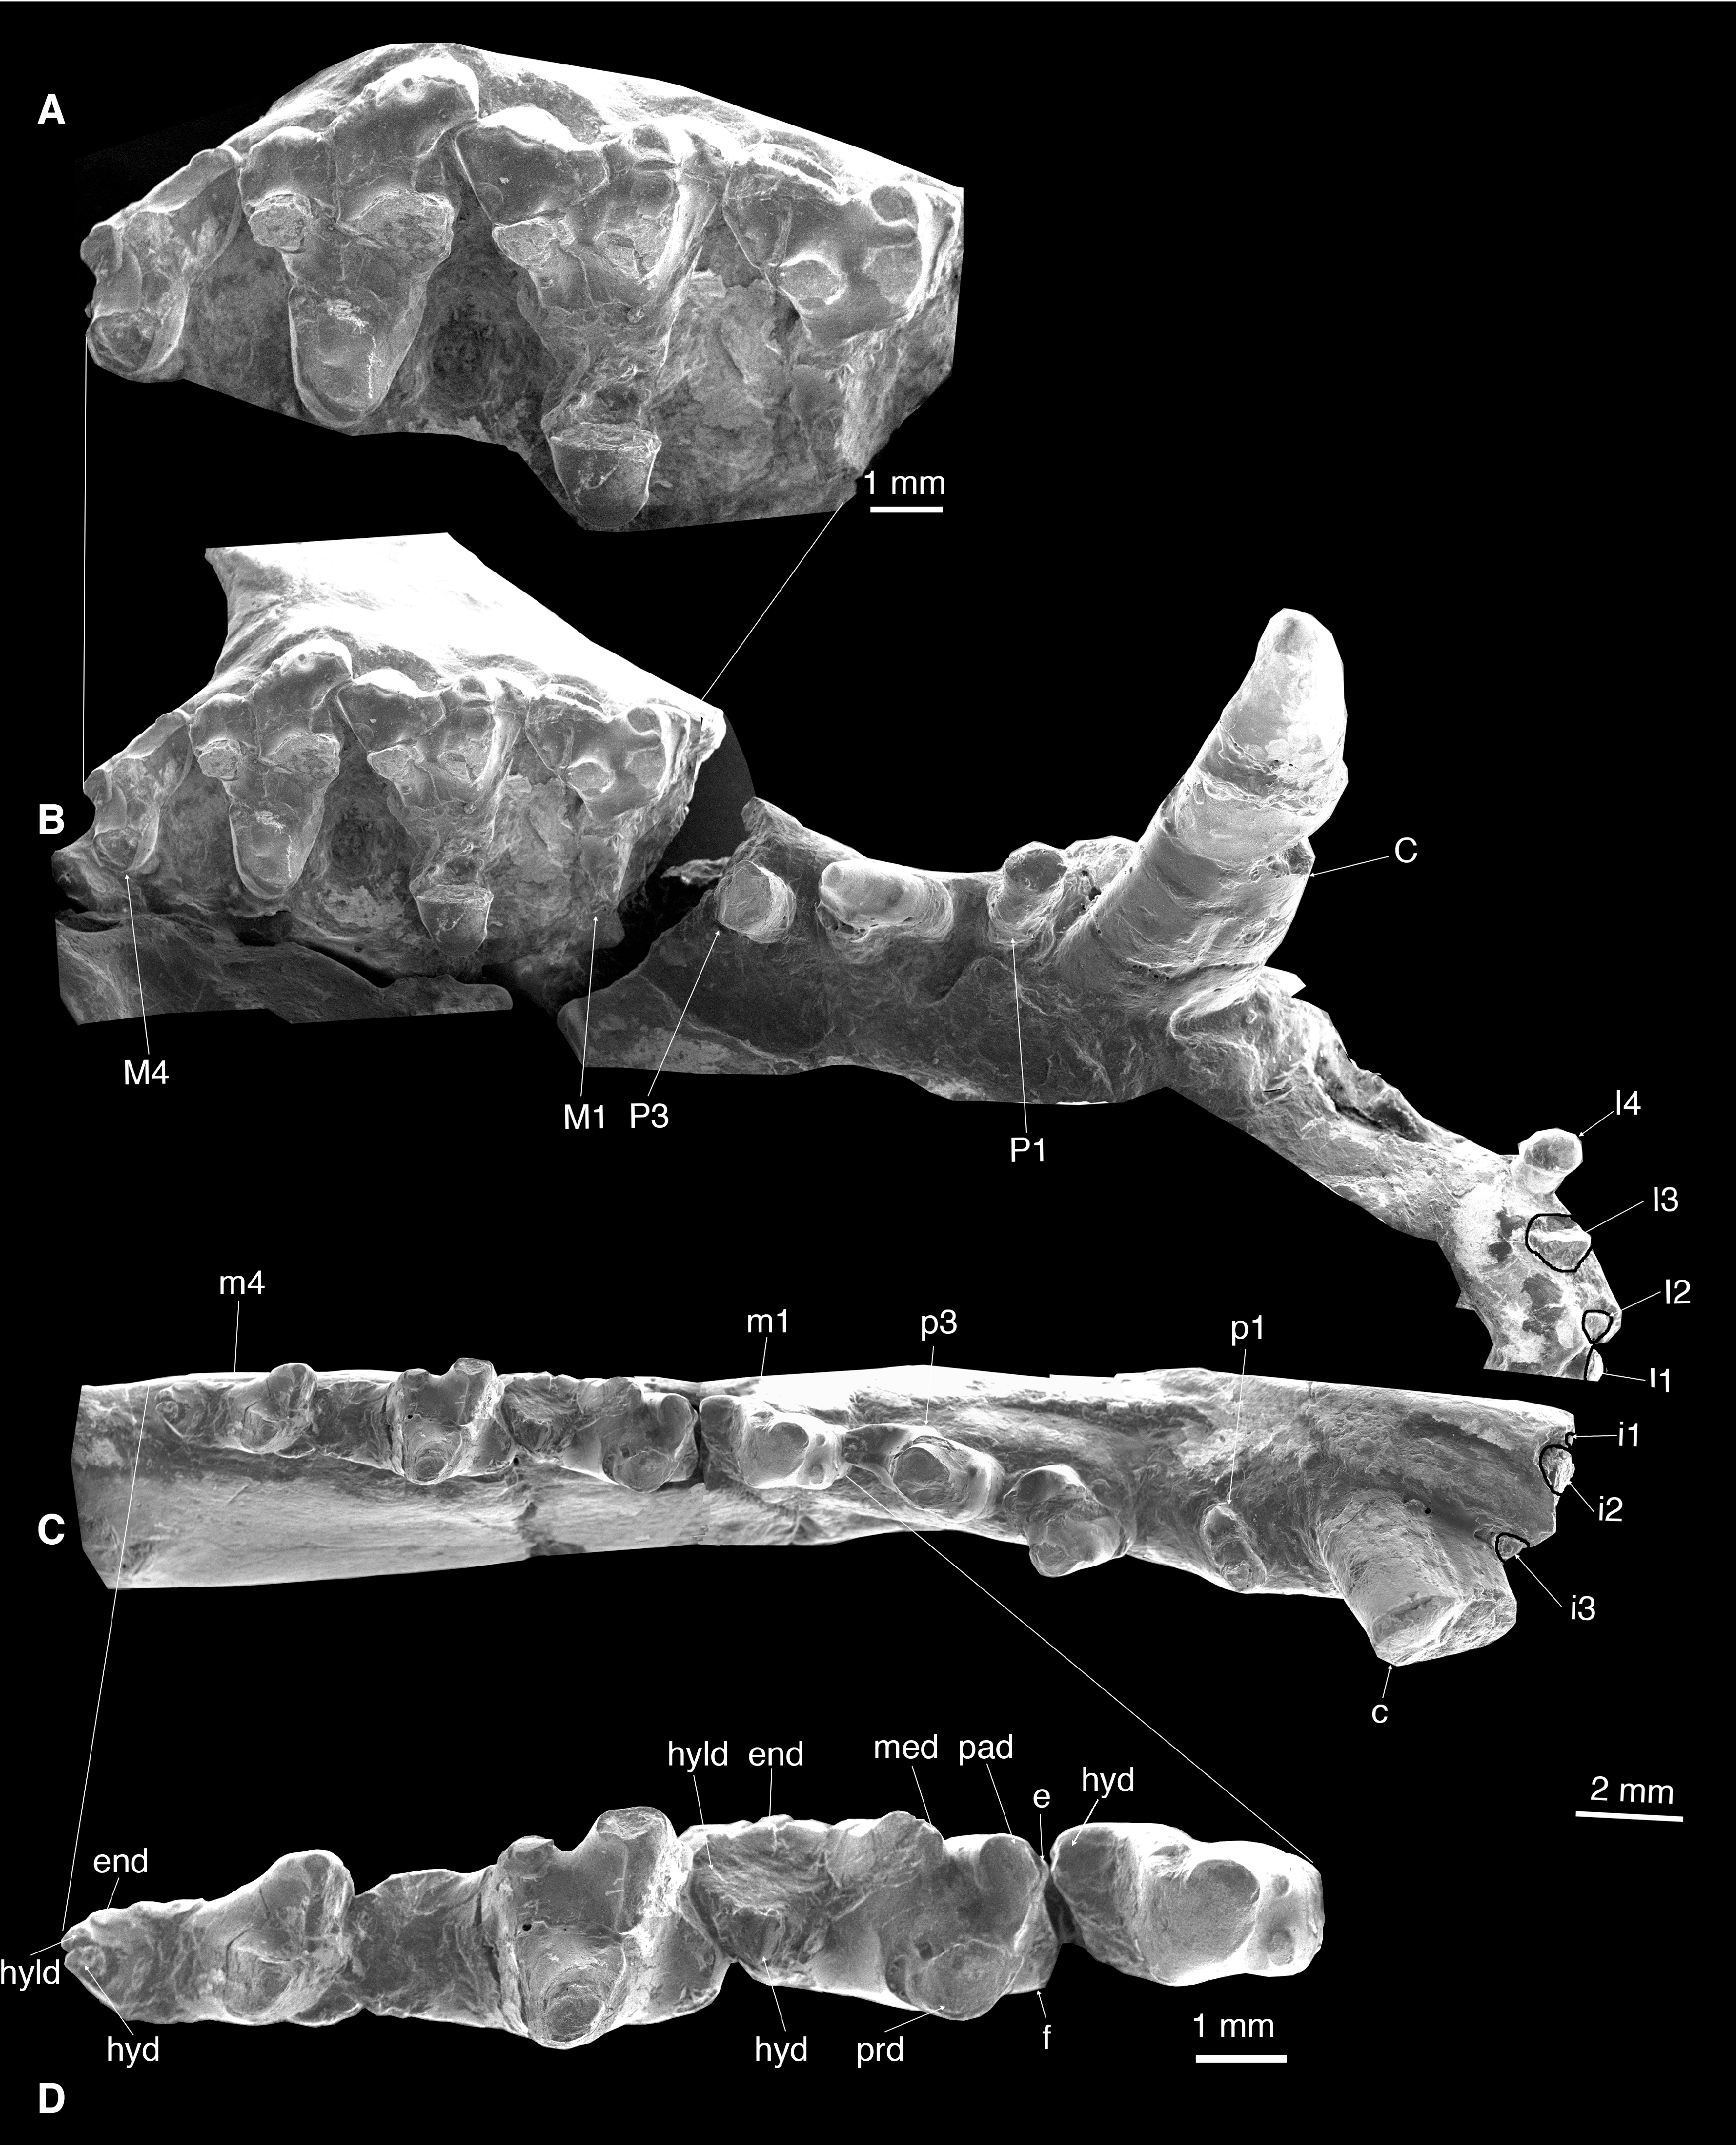 Upper dentitions of various therians from the Cretaceous, Kyzylkum